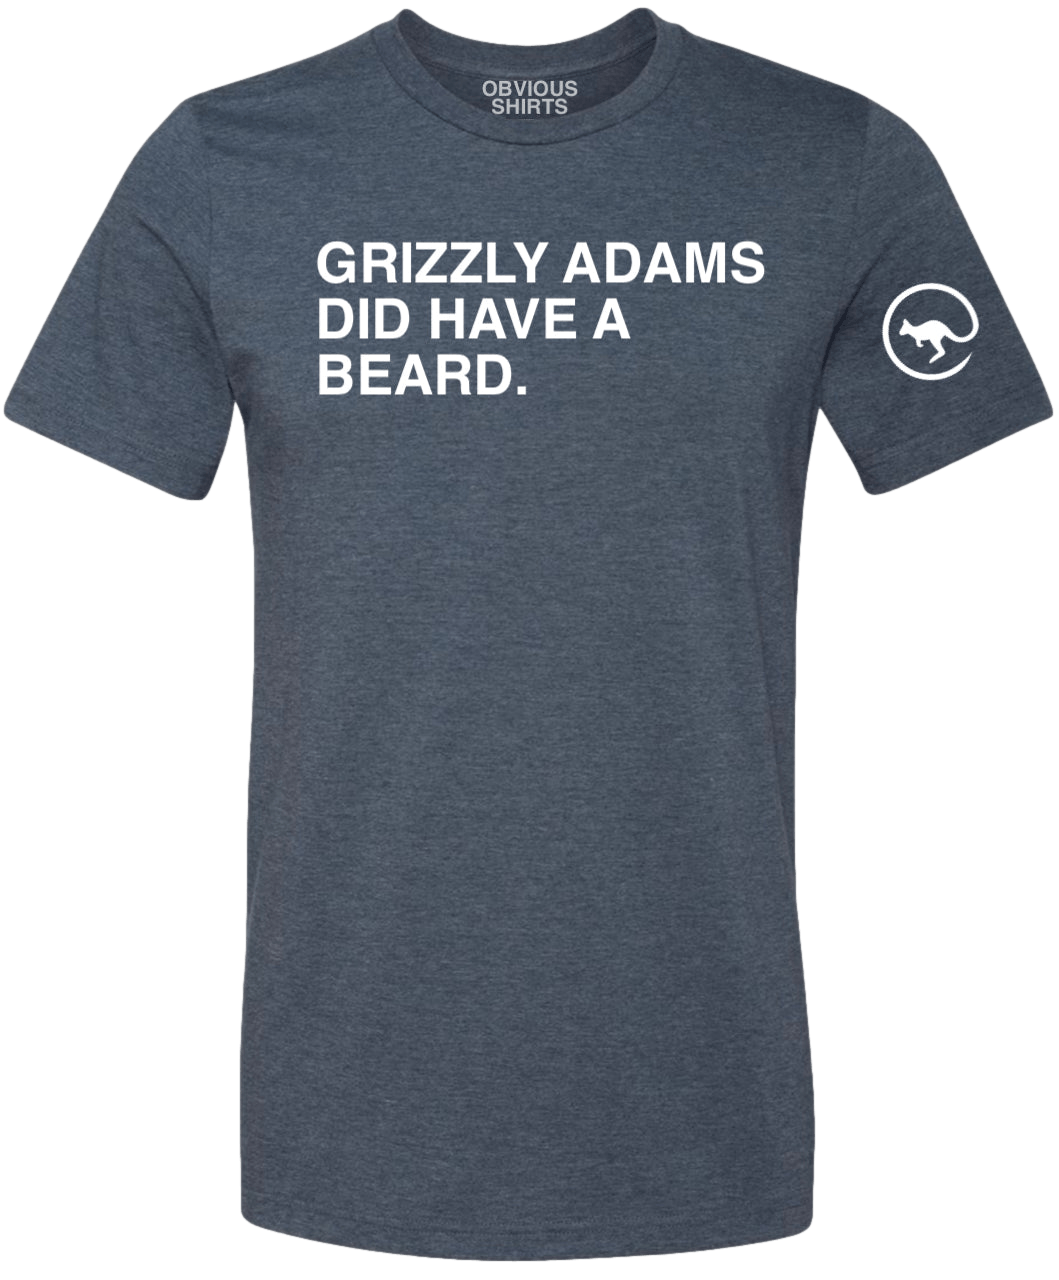 GRIZZLY ADAMS DID HAVE A BEARD (NAVY) - OBVIOUS SHIRTS